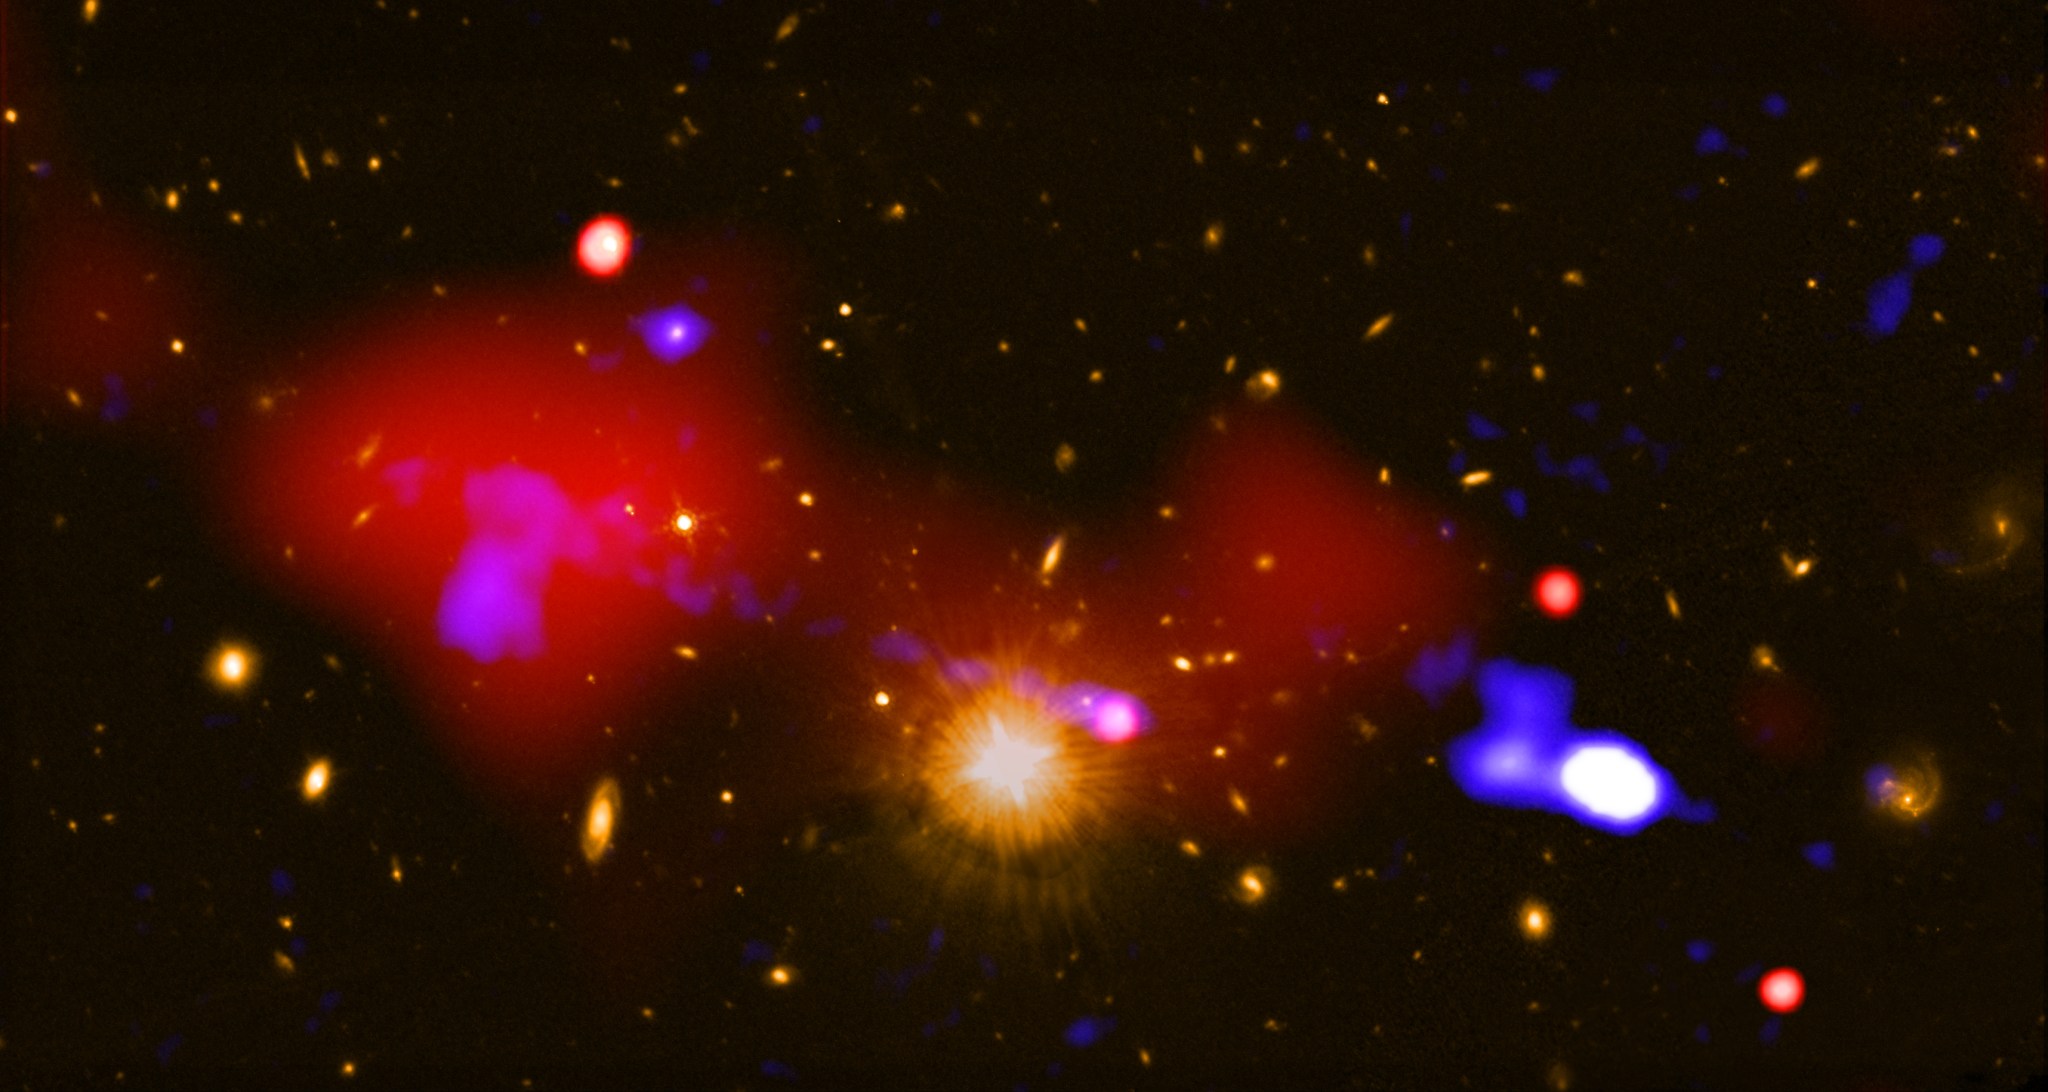 An image that contains a black hole that is triggering star formation across the longest distance ever seen.